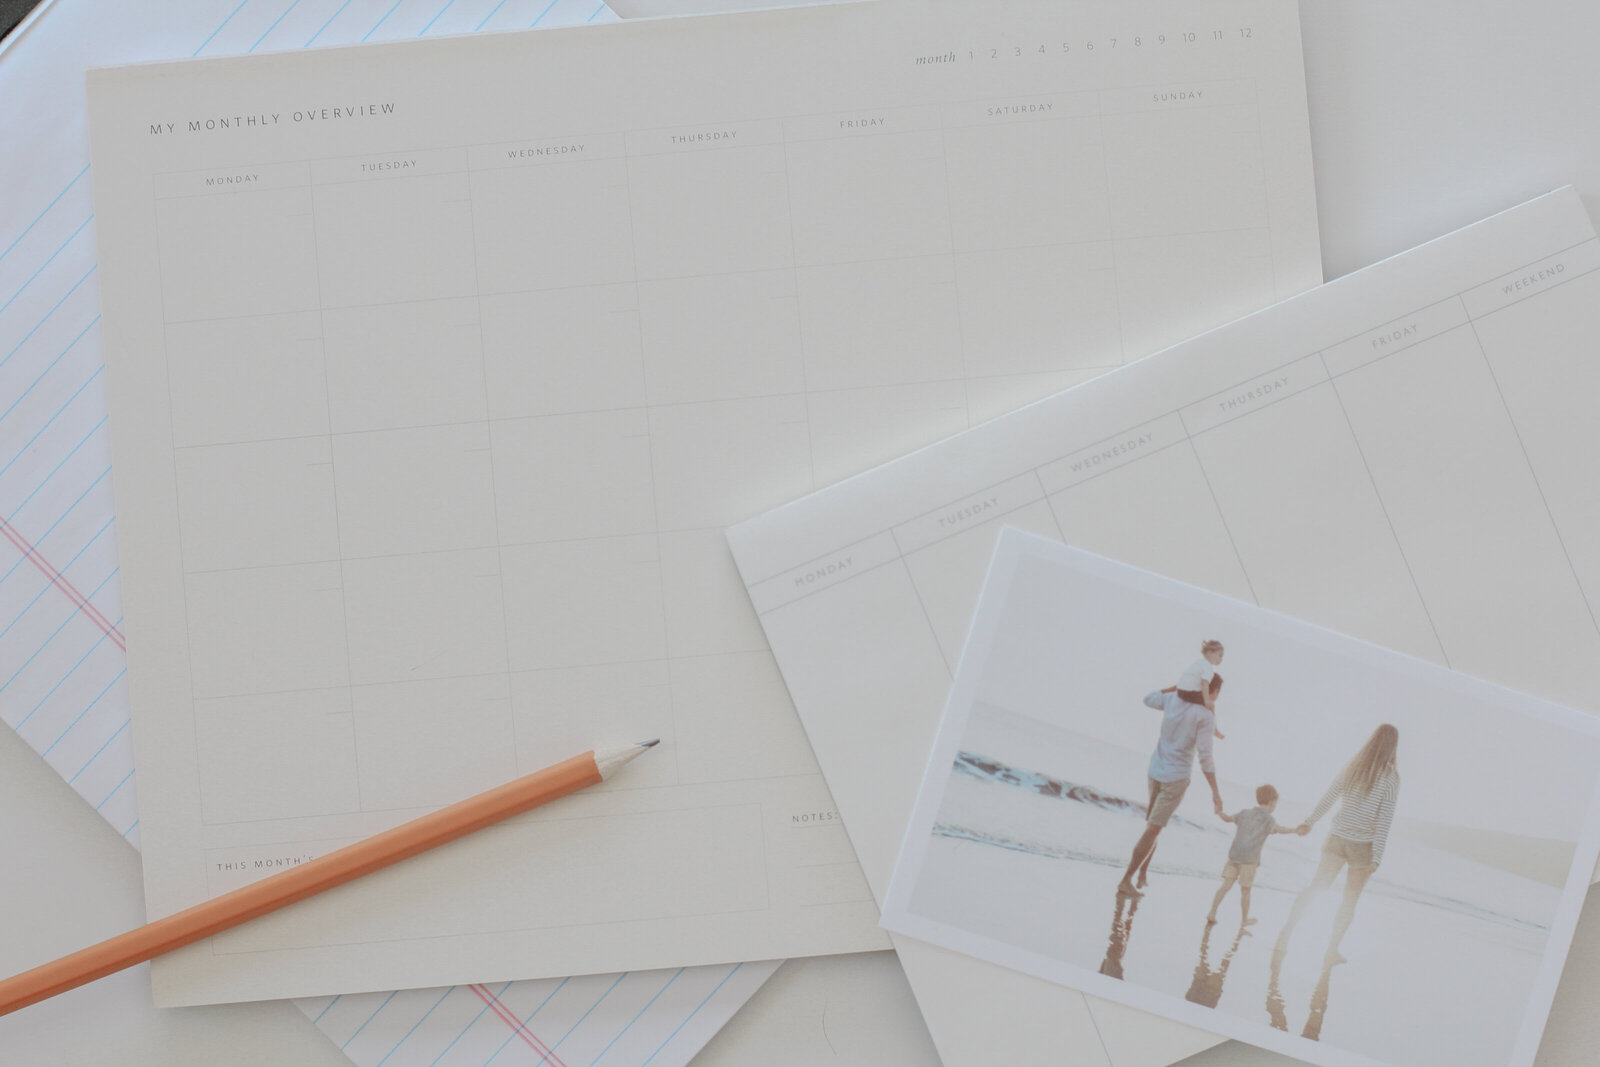 Calendar with pencil and photographs